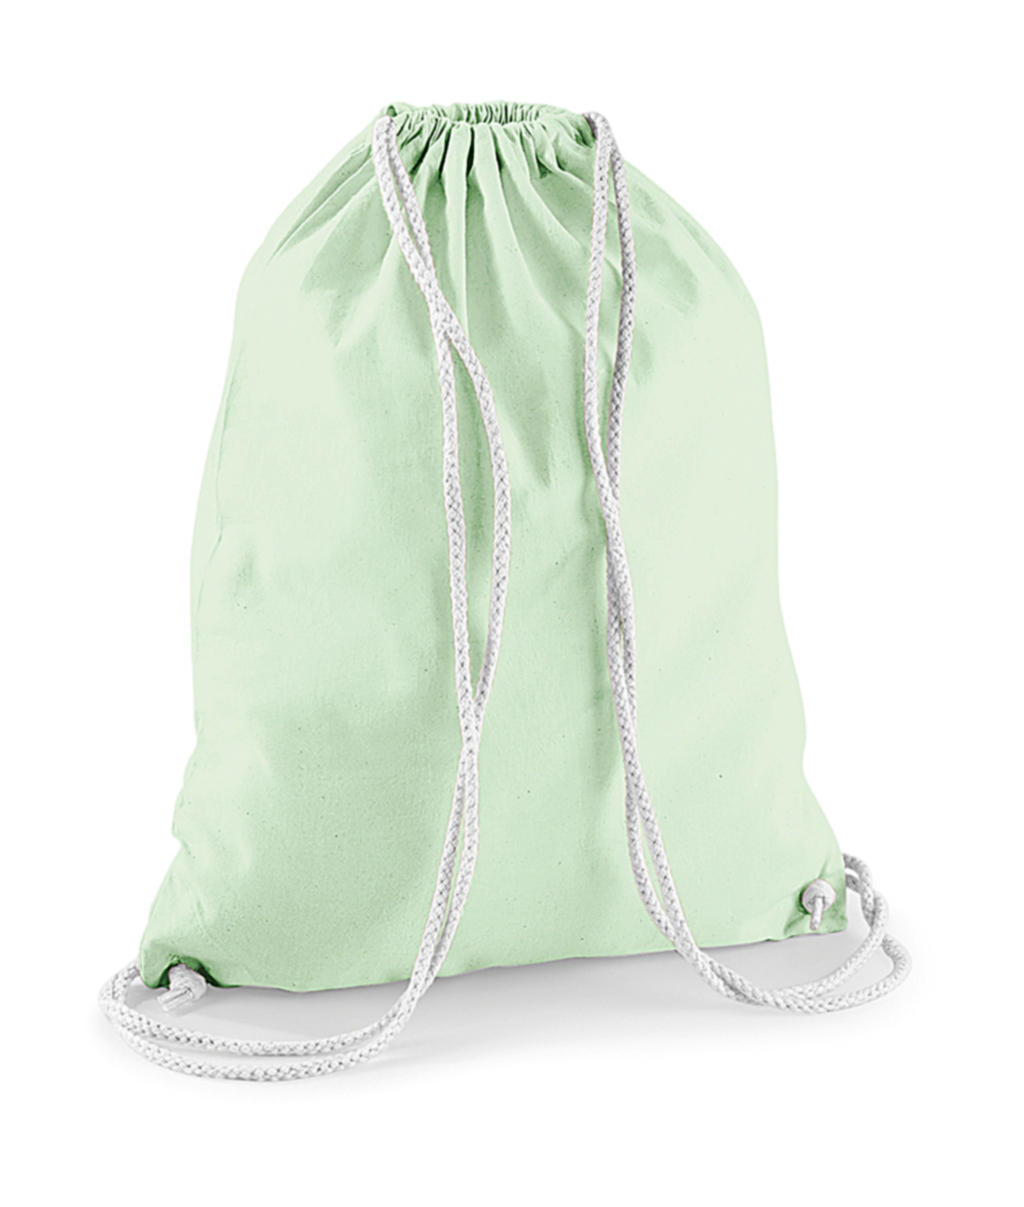  Cotton Gymsac in Farbe Pastel Mint/White